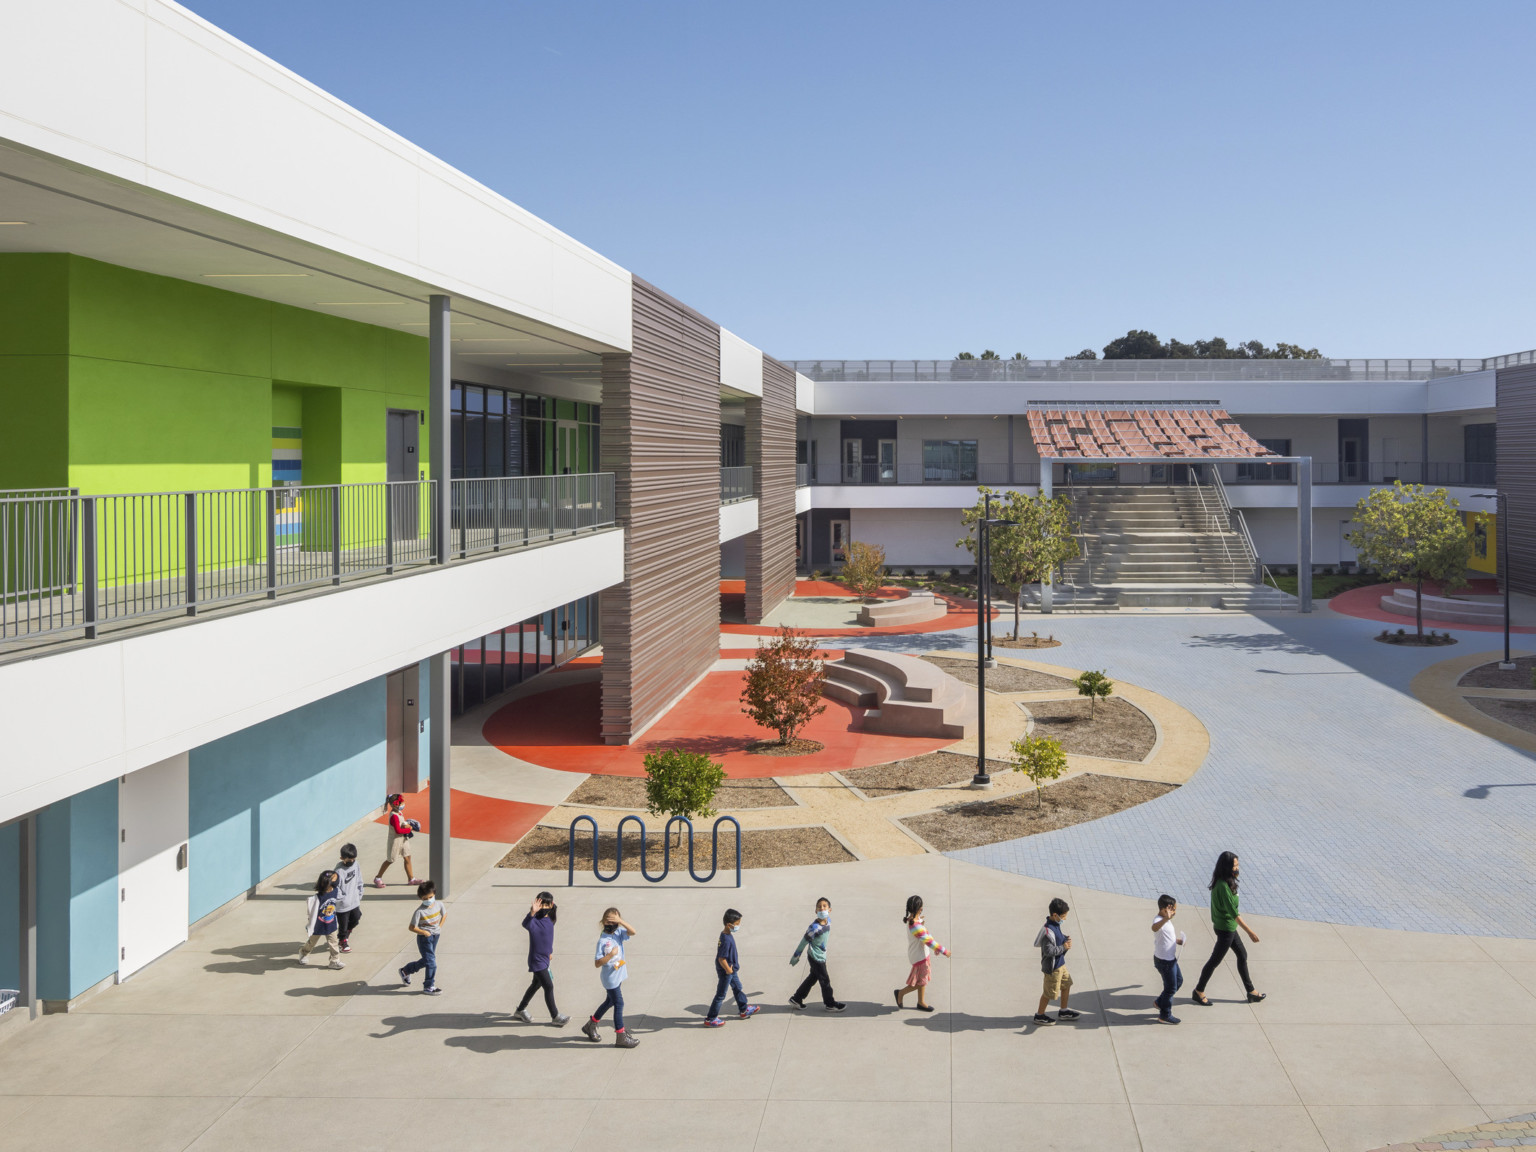 Exterior courtyard, blue and green walls to left with white walkway and canopy. Round orange accent on ground